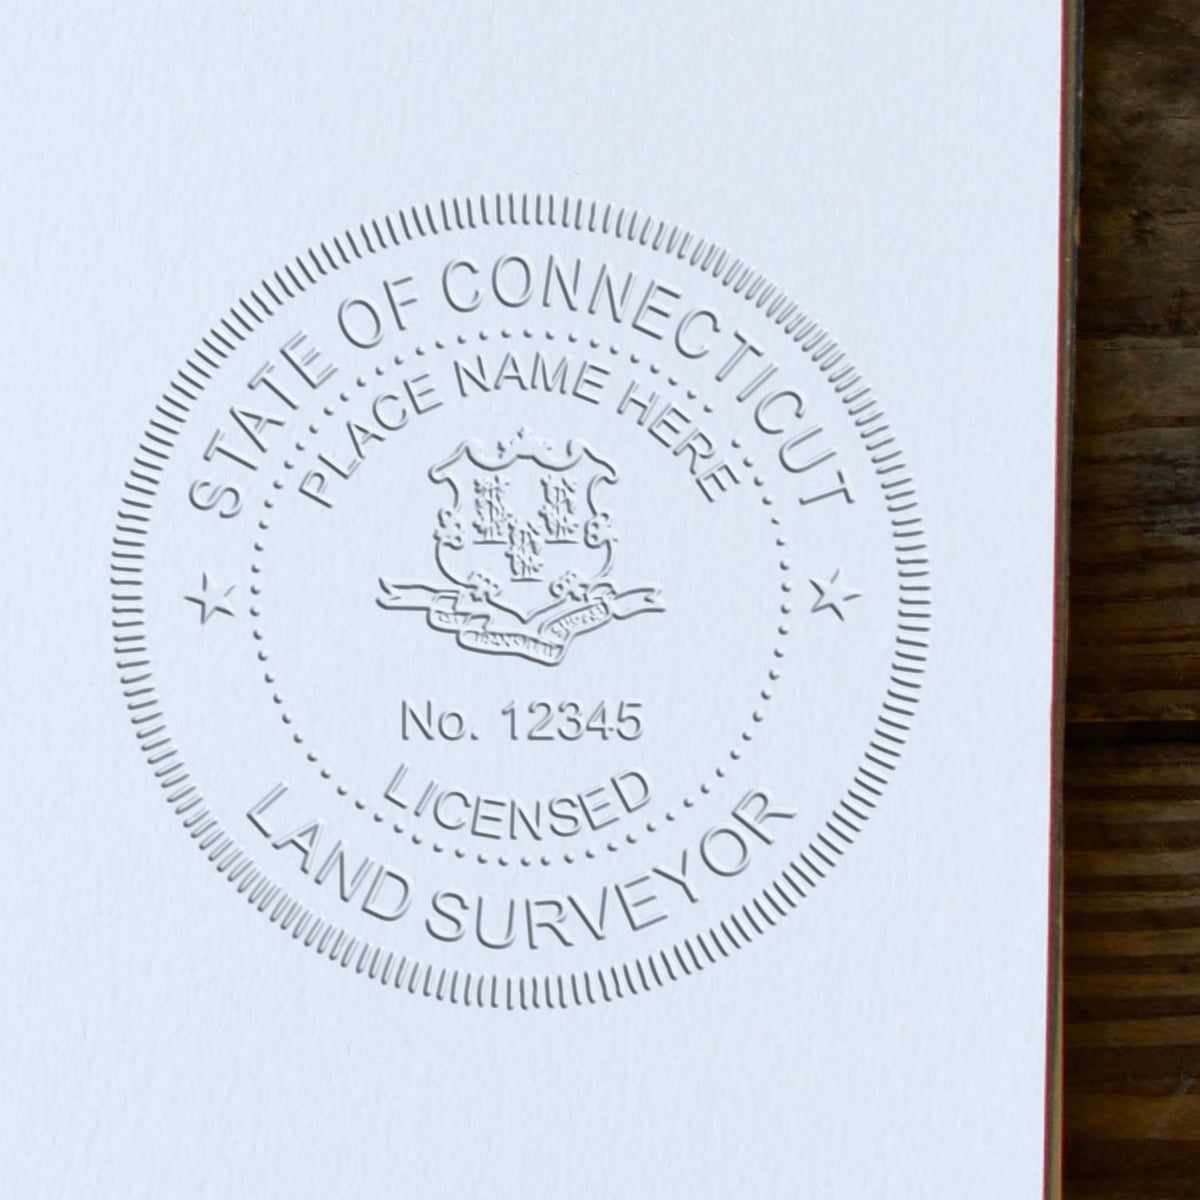 The Long Reach Connecticut Land Surveyor Seal stamp impression comes to life with a crisp, detailed photo on paper - showcasing true professional quality.